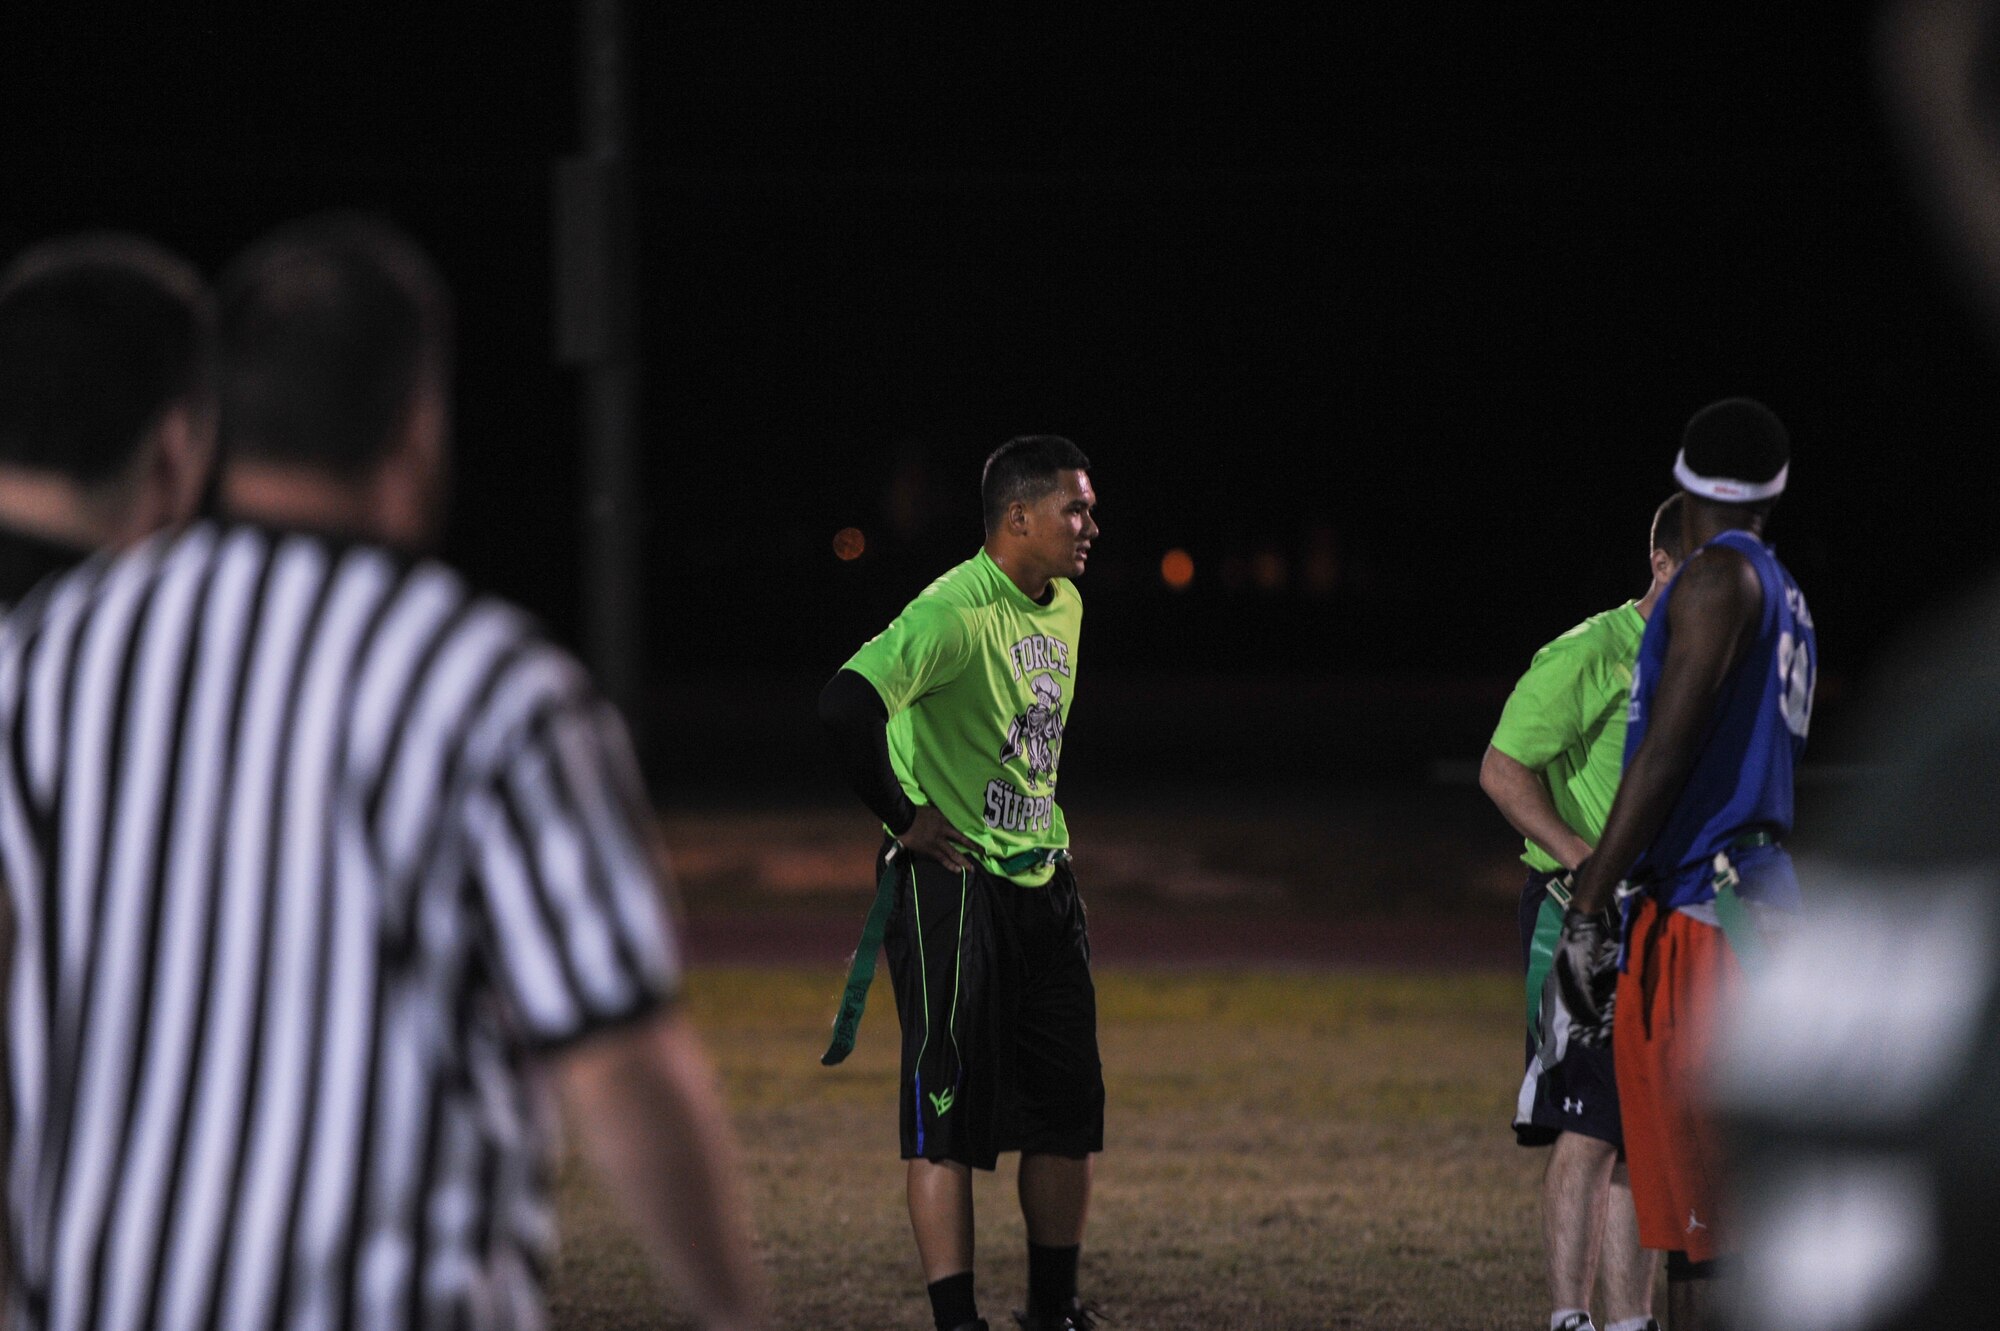 Fredrick Burgos, the 19th Force Support Squadron quarterback, looks on after throwing his second interception of the night Oct. 16, 2014, at Little Rock Air Force Base, Ark. Burgos and his FSS squad failed to find pay dirt in the 20-0 shutout. (U.S. Air Force photo by Airman 1st Class Cliffton Dolezal)
